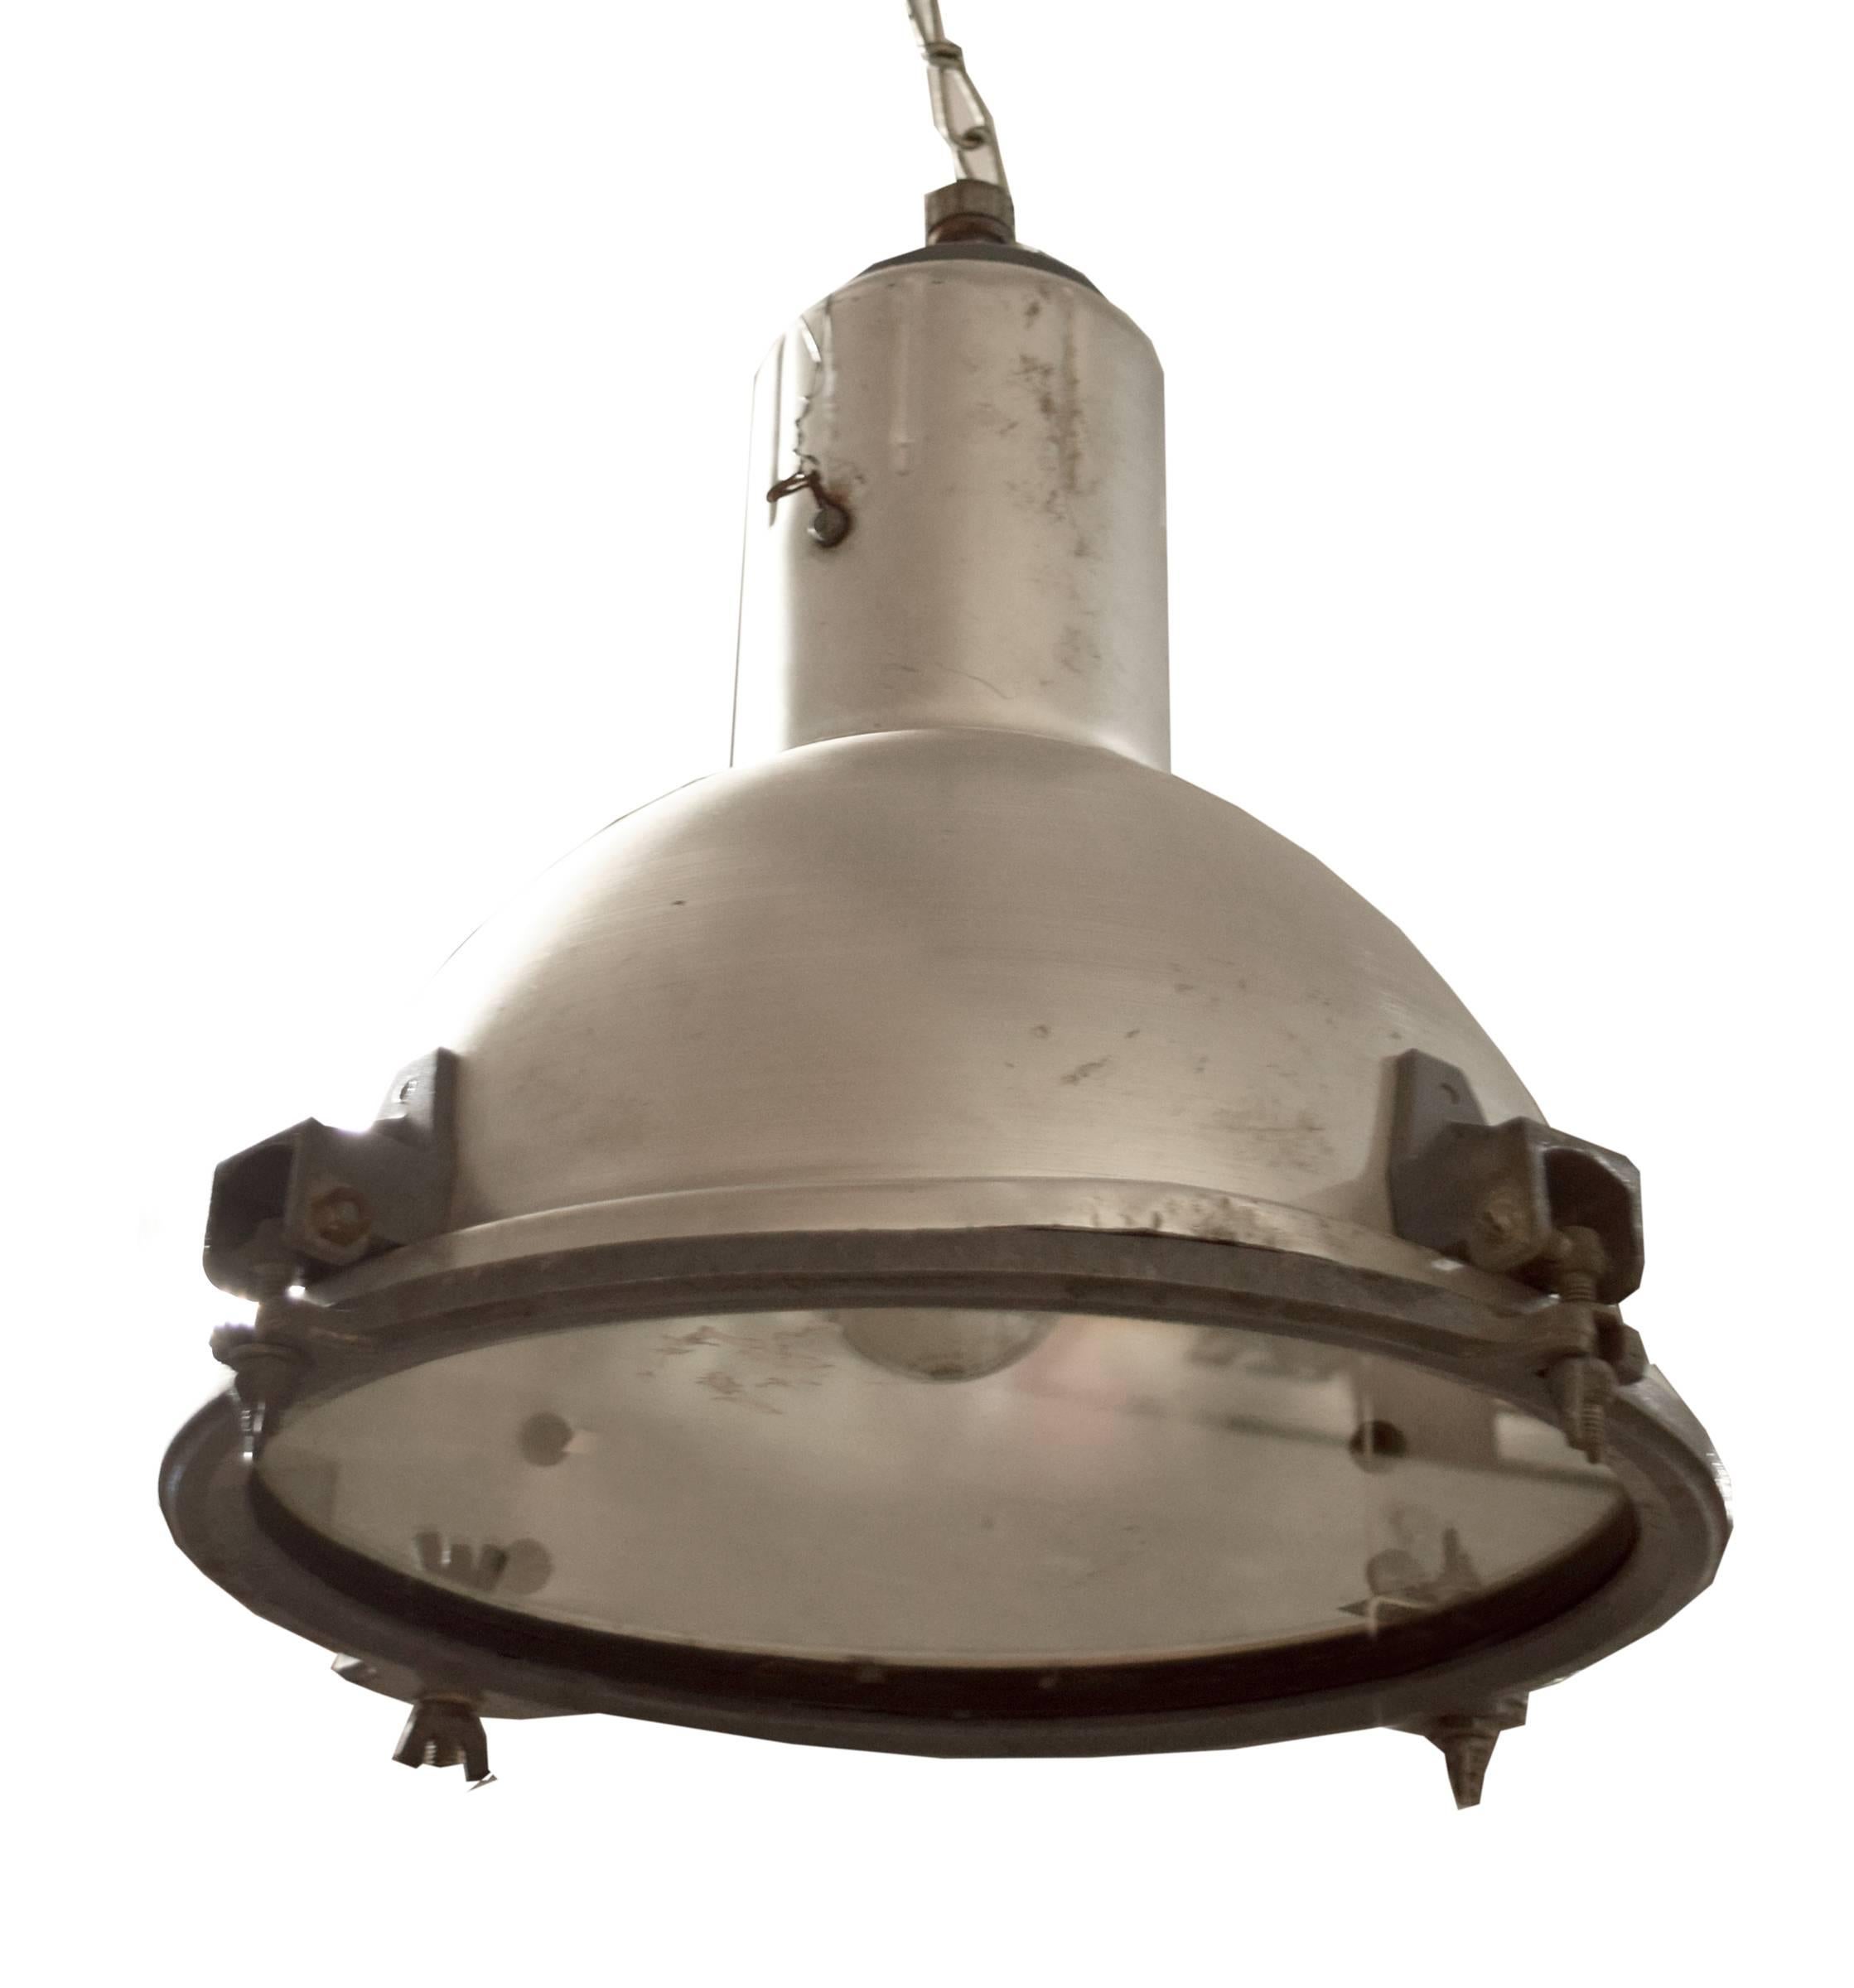 An American industrial light fixture with a domed shade and glass diffuser, circa 1940s.

Need to be re-wired.